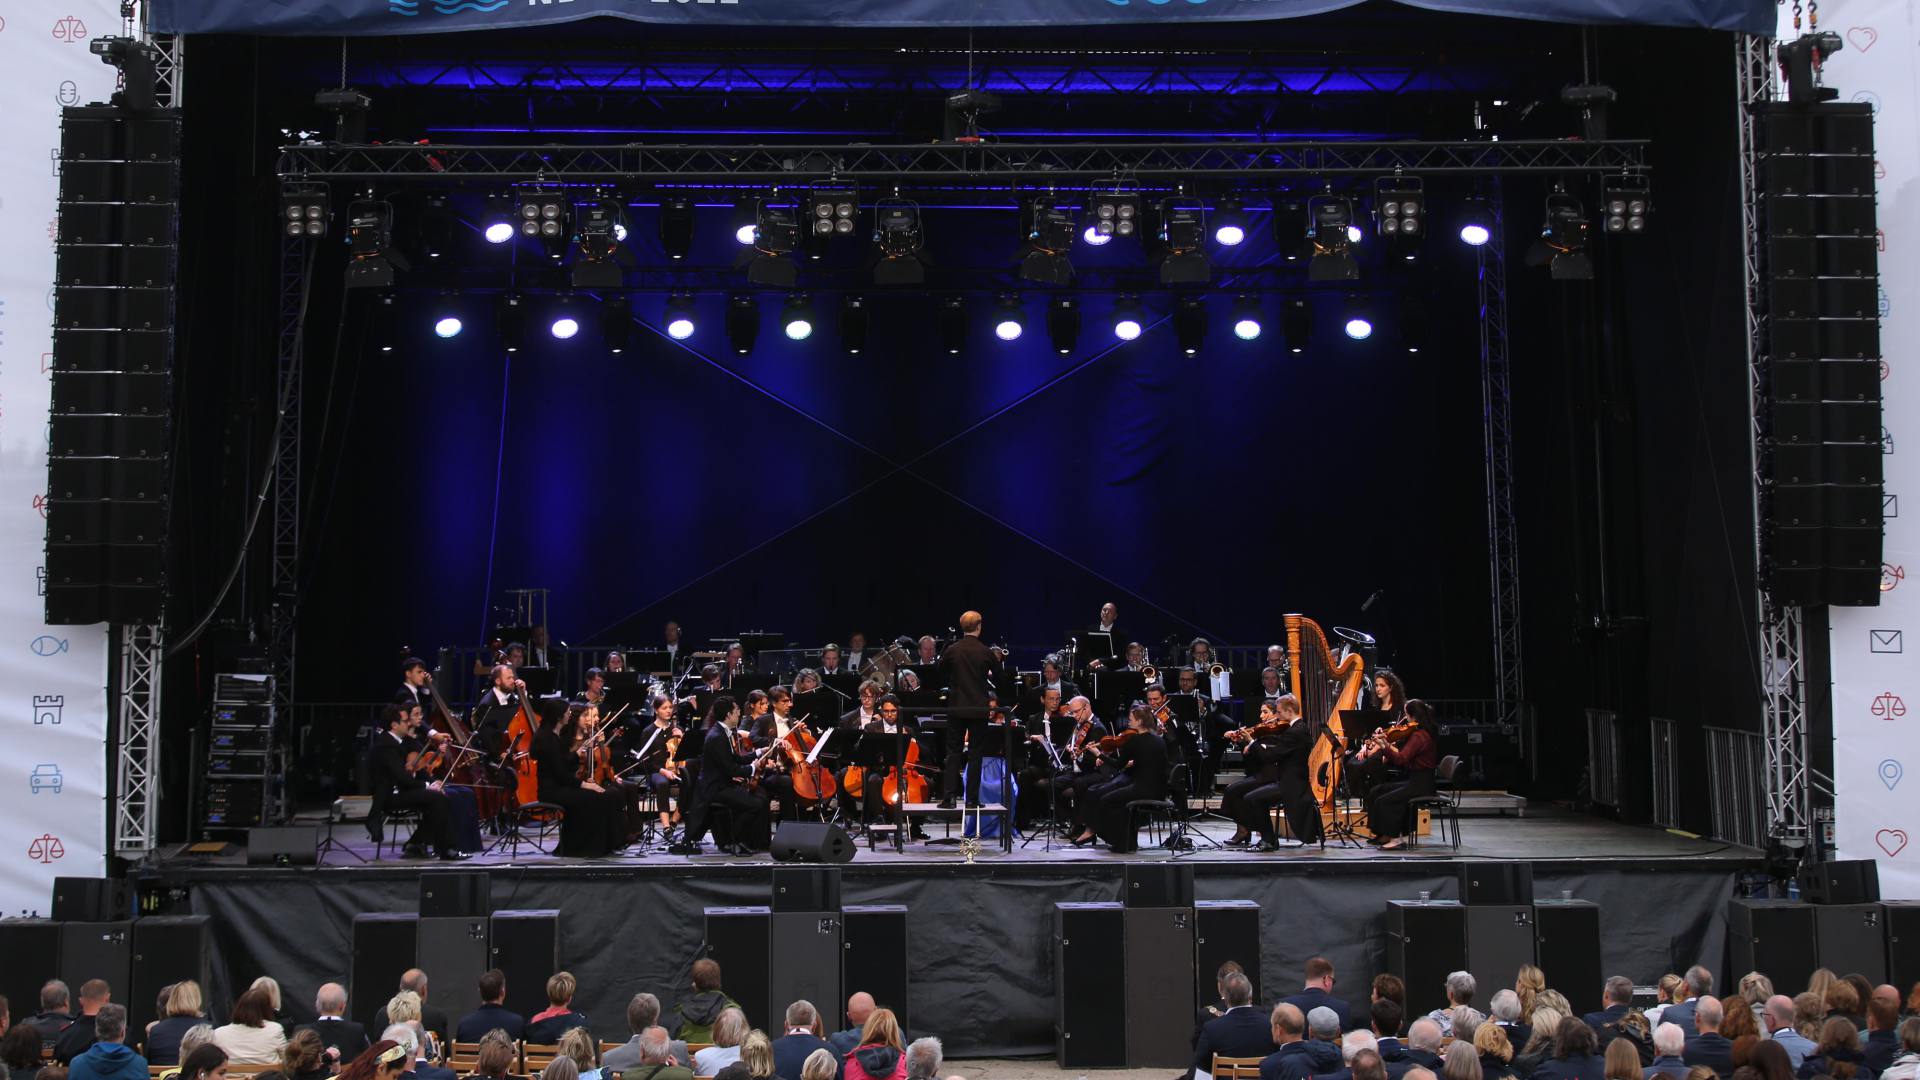 The main stage at the RennbahnPark is well filled with numerous musicians.